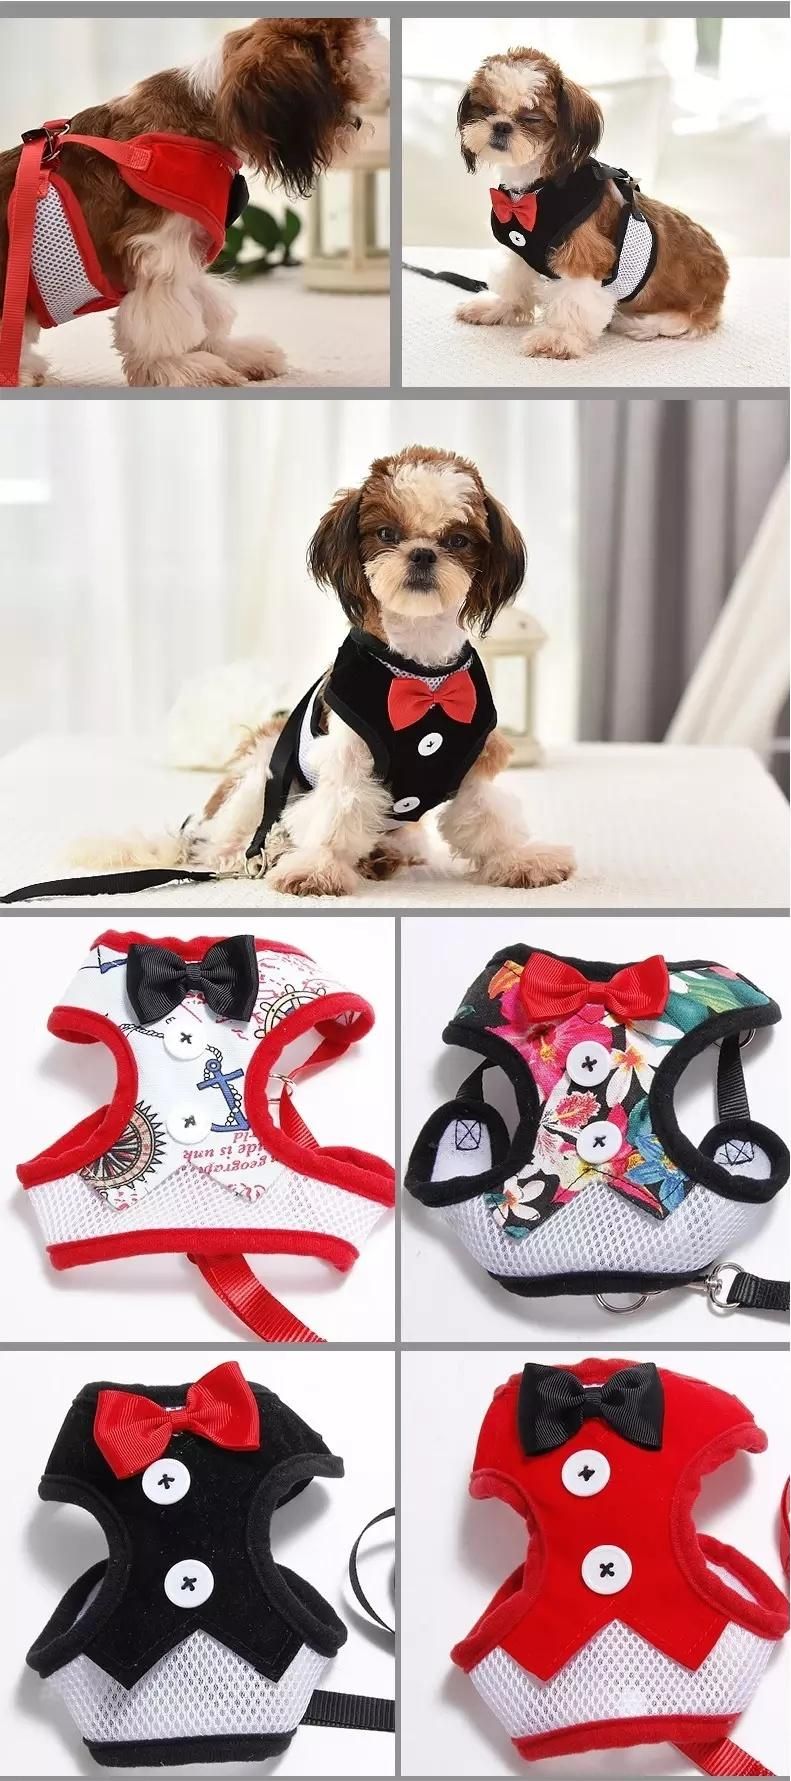 High-Quality Double-Sided Mesh Material Adjustable Pet/Dog Seat Belt